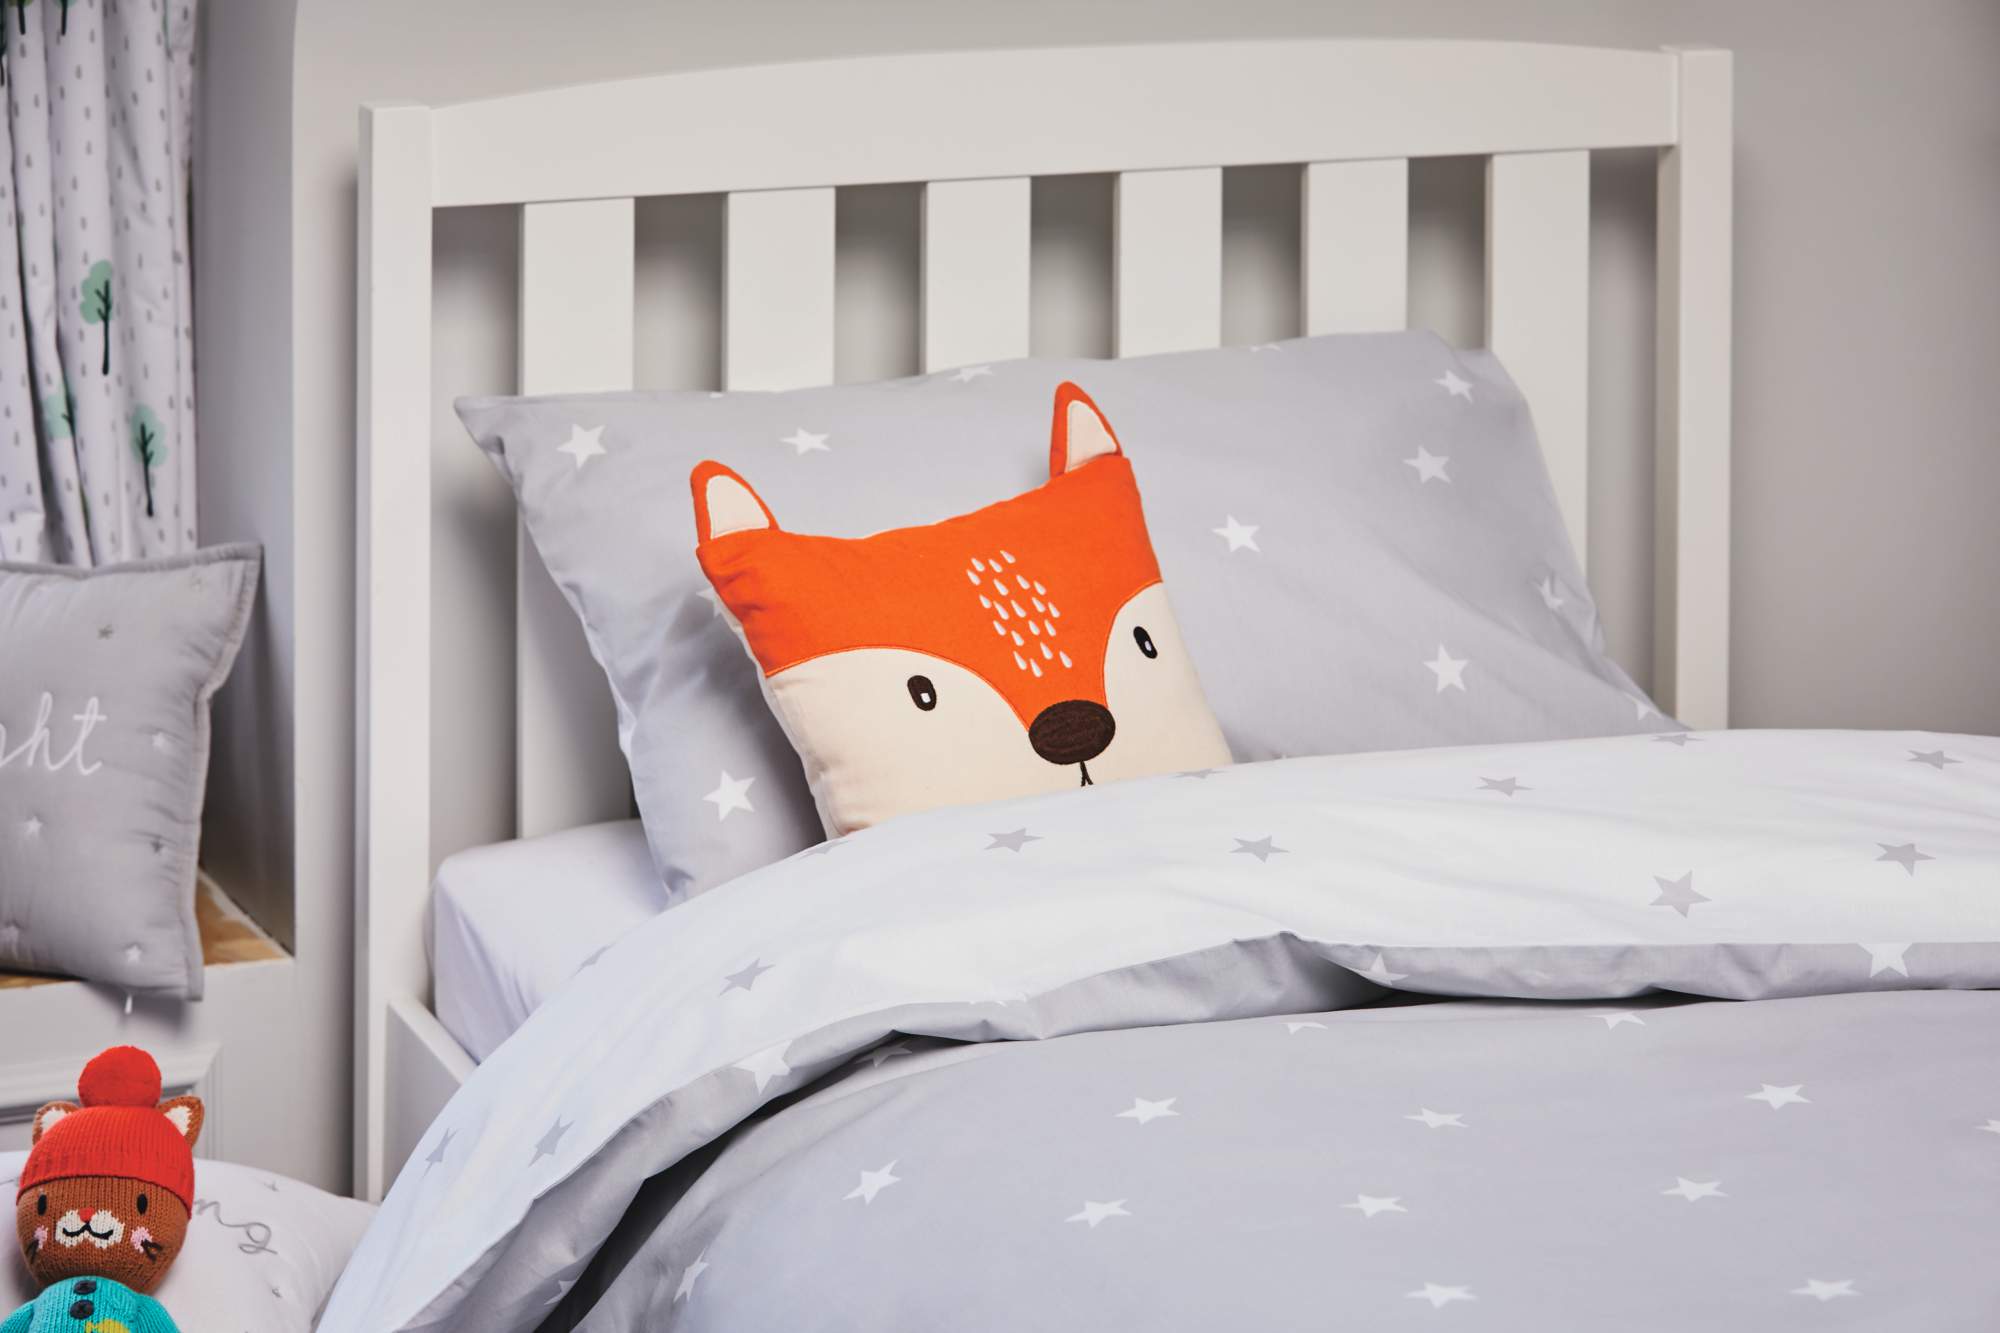 Top tips for getting a good night’s sleep from The Children’s Sleep Charity